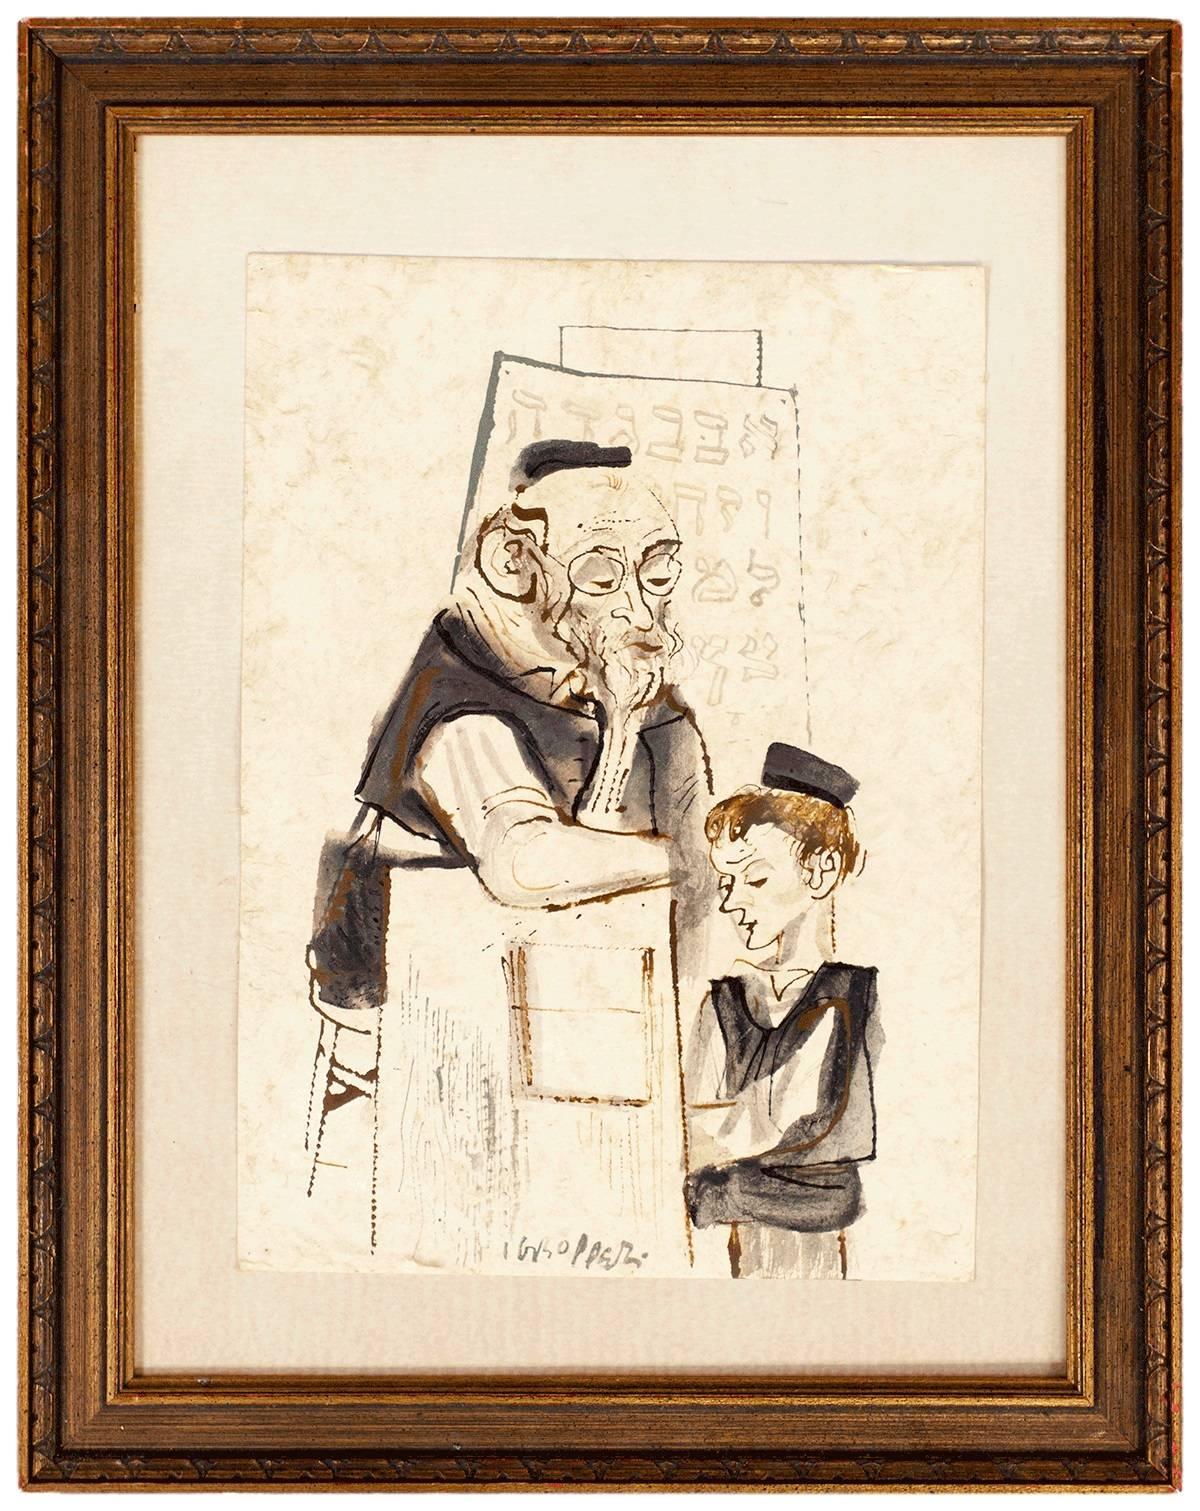 William Gropper Figurative Painting - Judaica Painting Bar Mitzvah Boy, Cheder Lessons